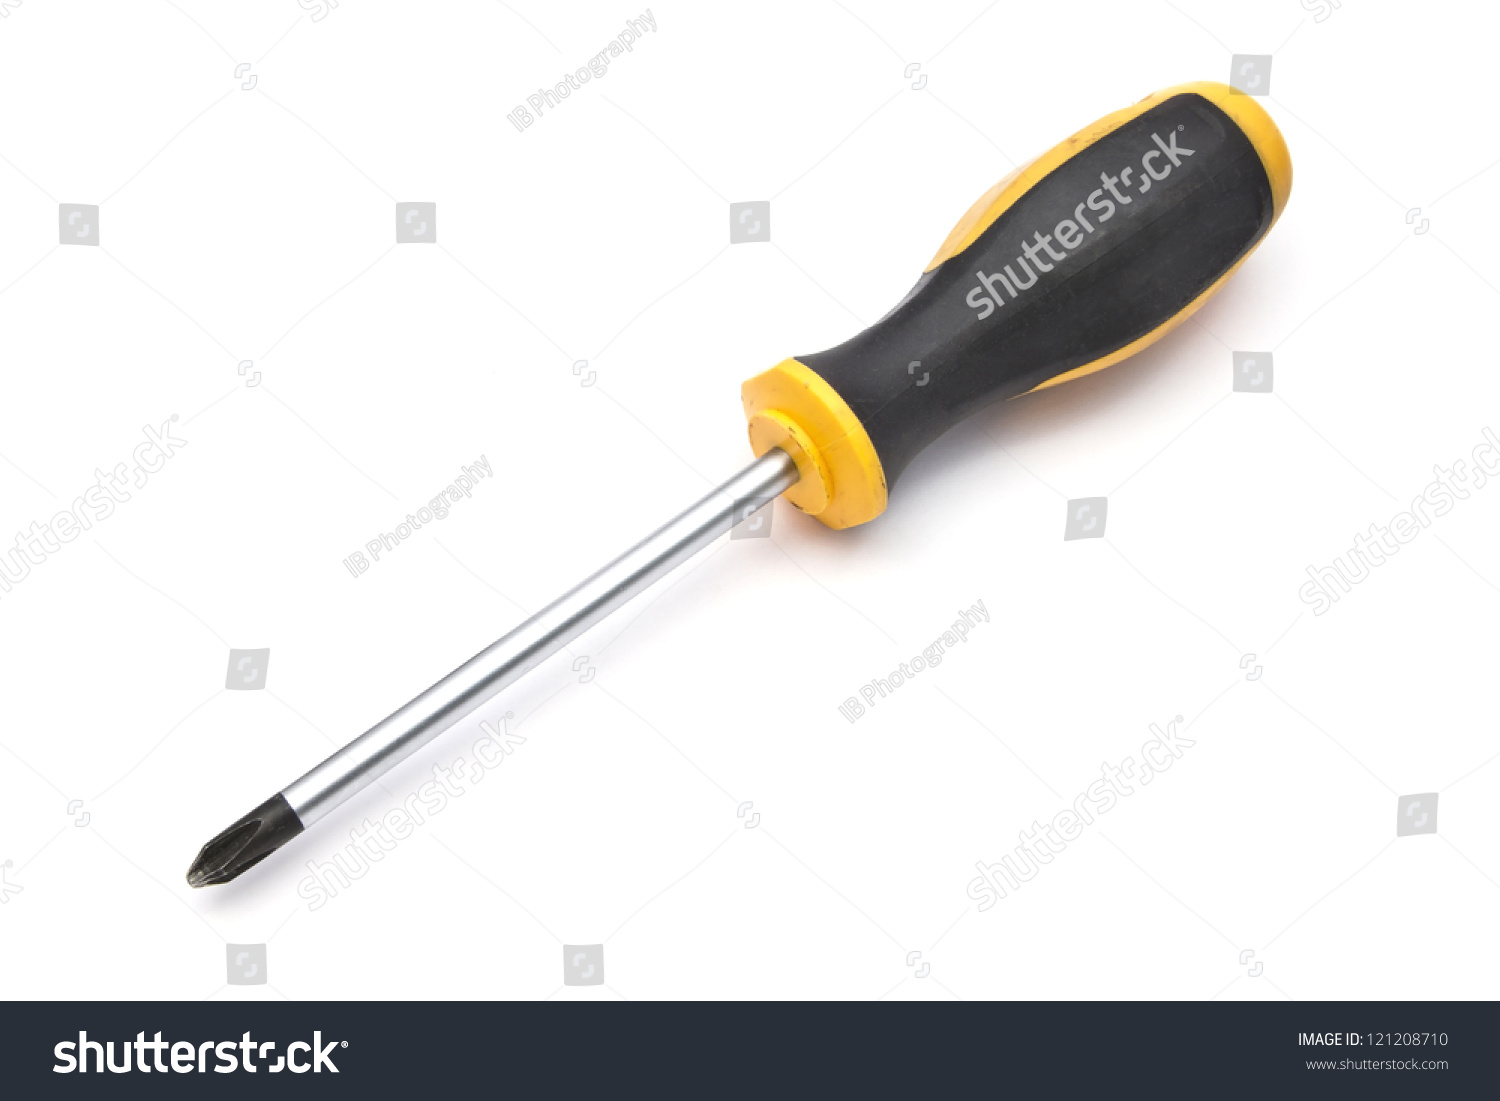 Yellow screwdriver and screws isolated on white background #121208710